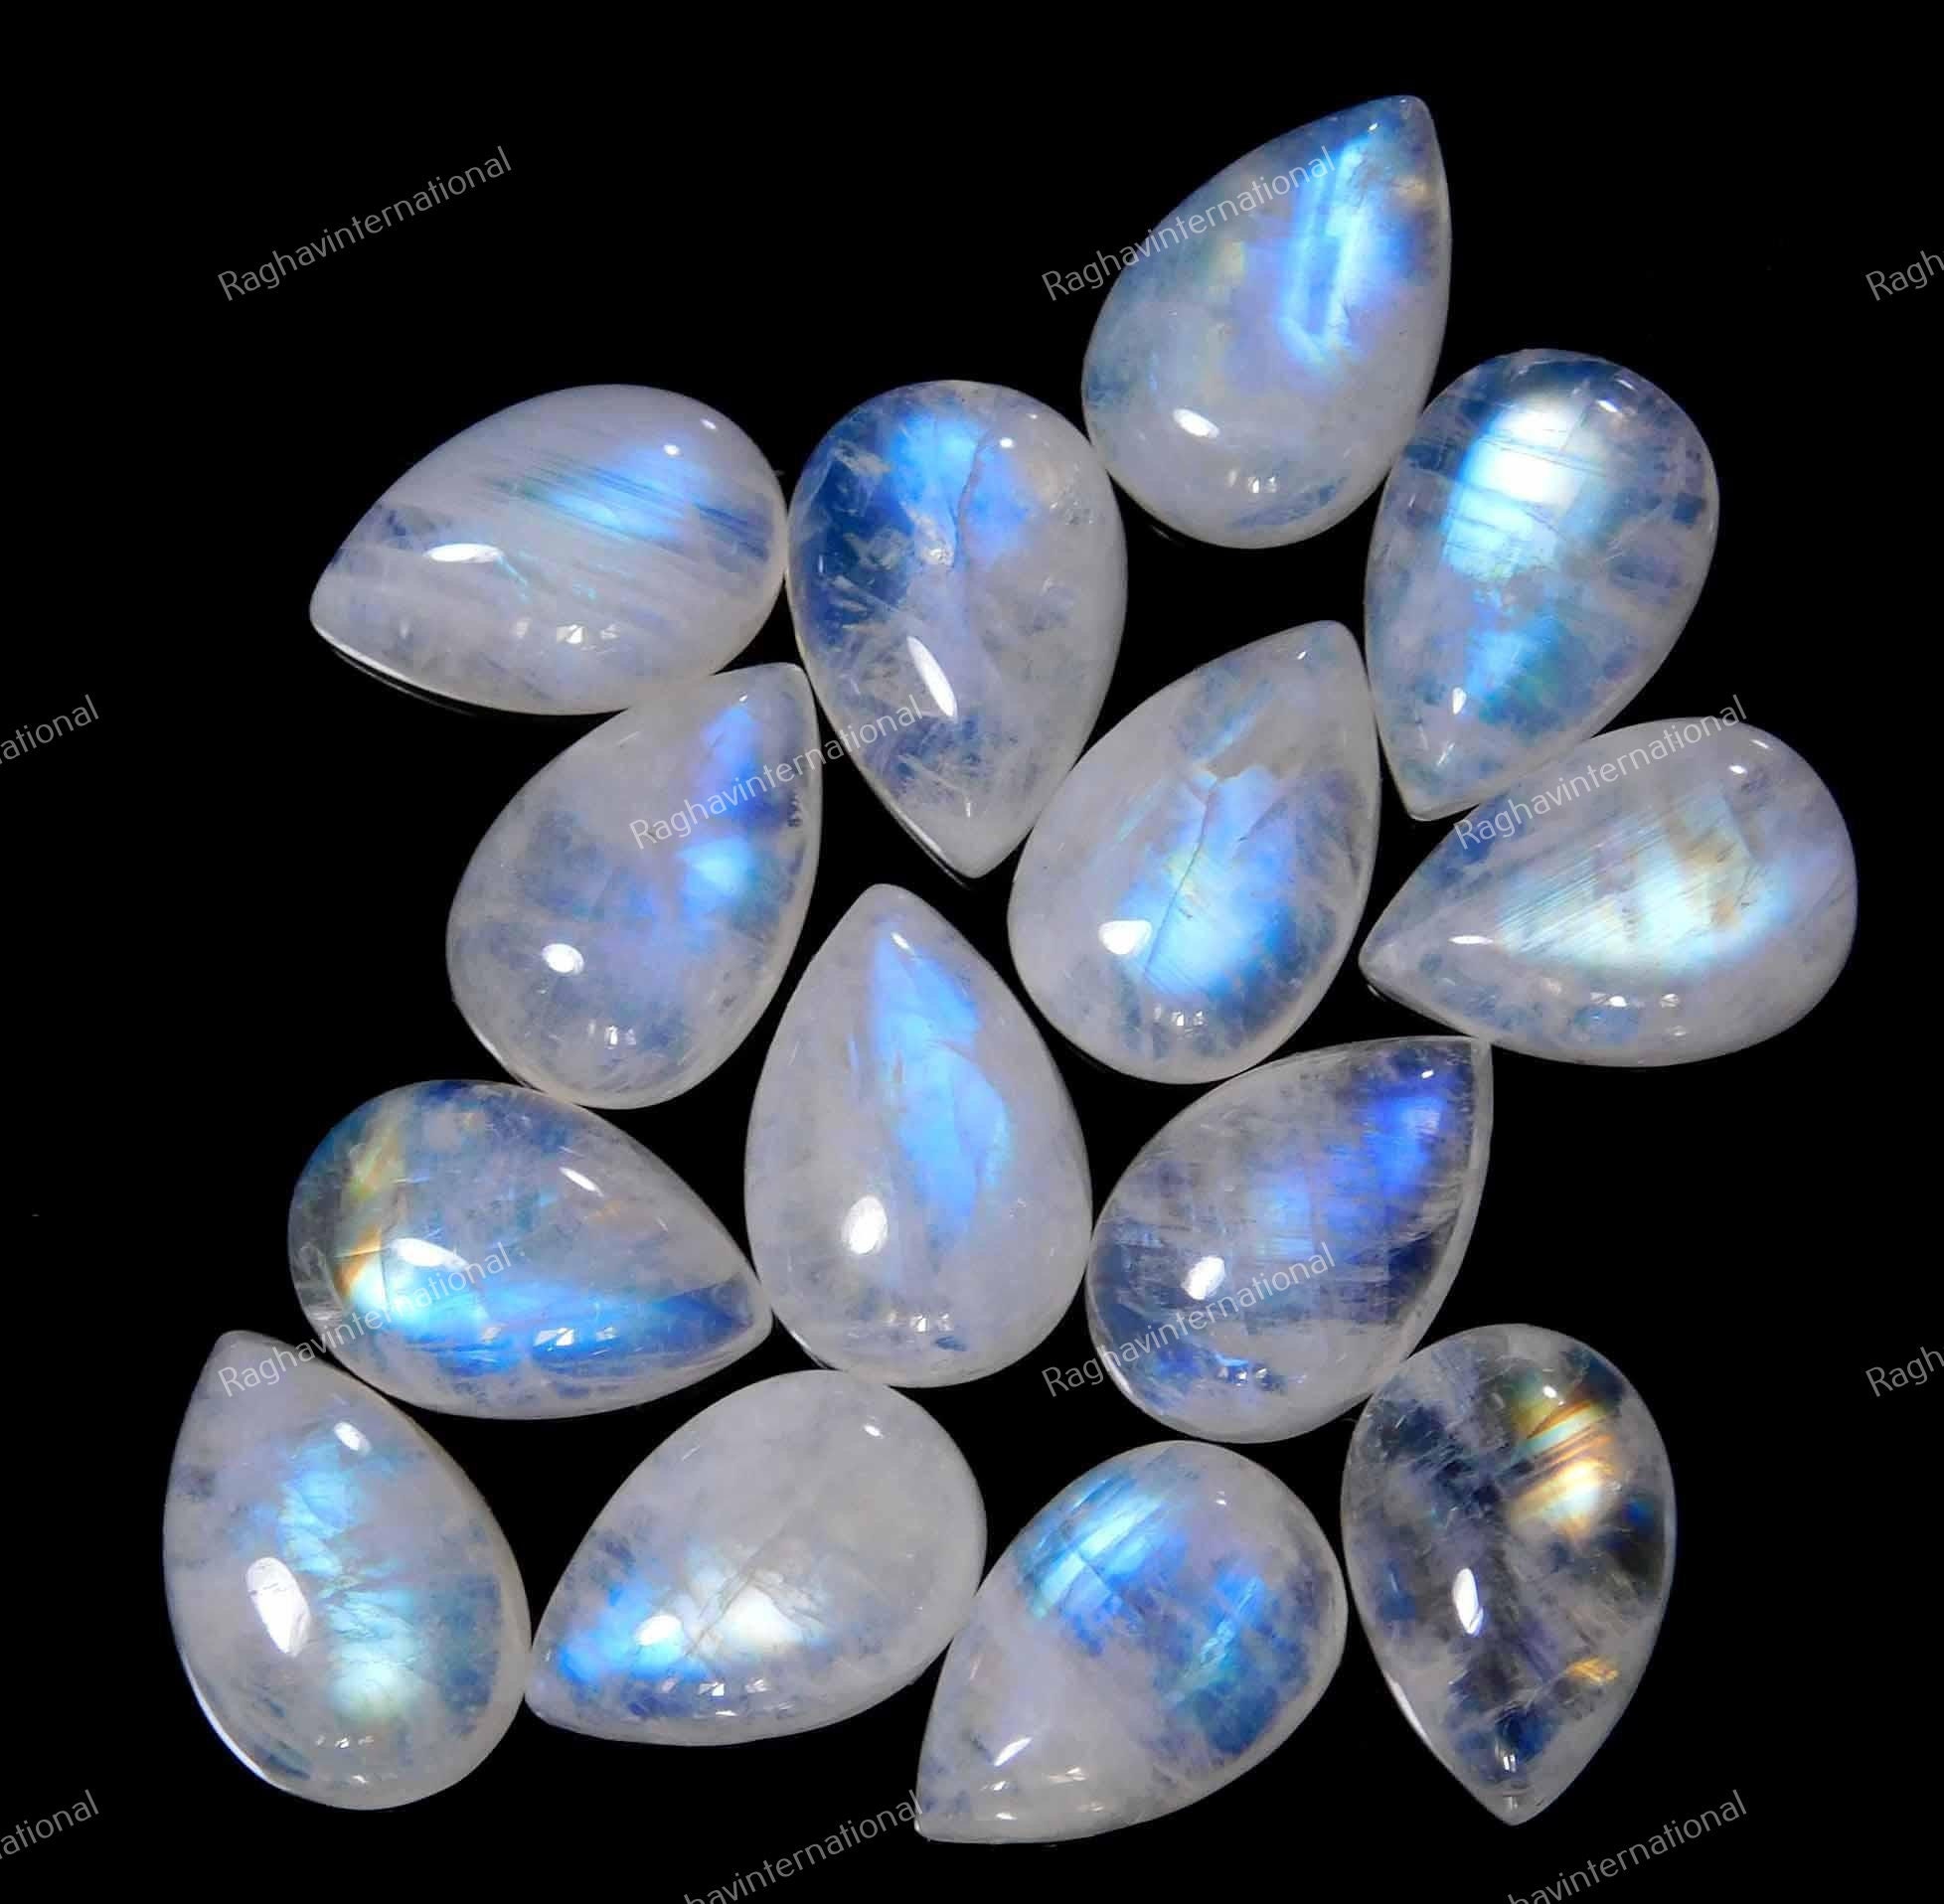 Details about   SALE! GREAT Lot Natural Rainbow Moonstone 12x16 mm Pear Cabochon Loose Gemstone 